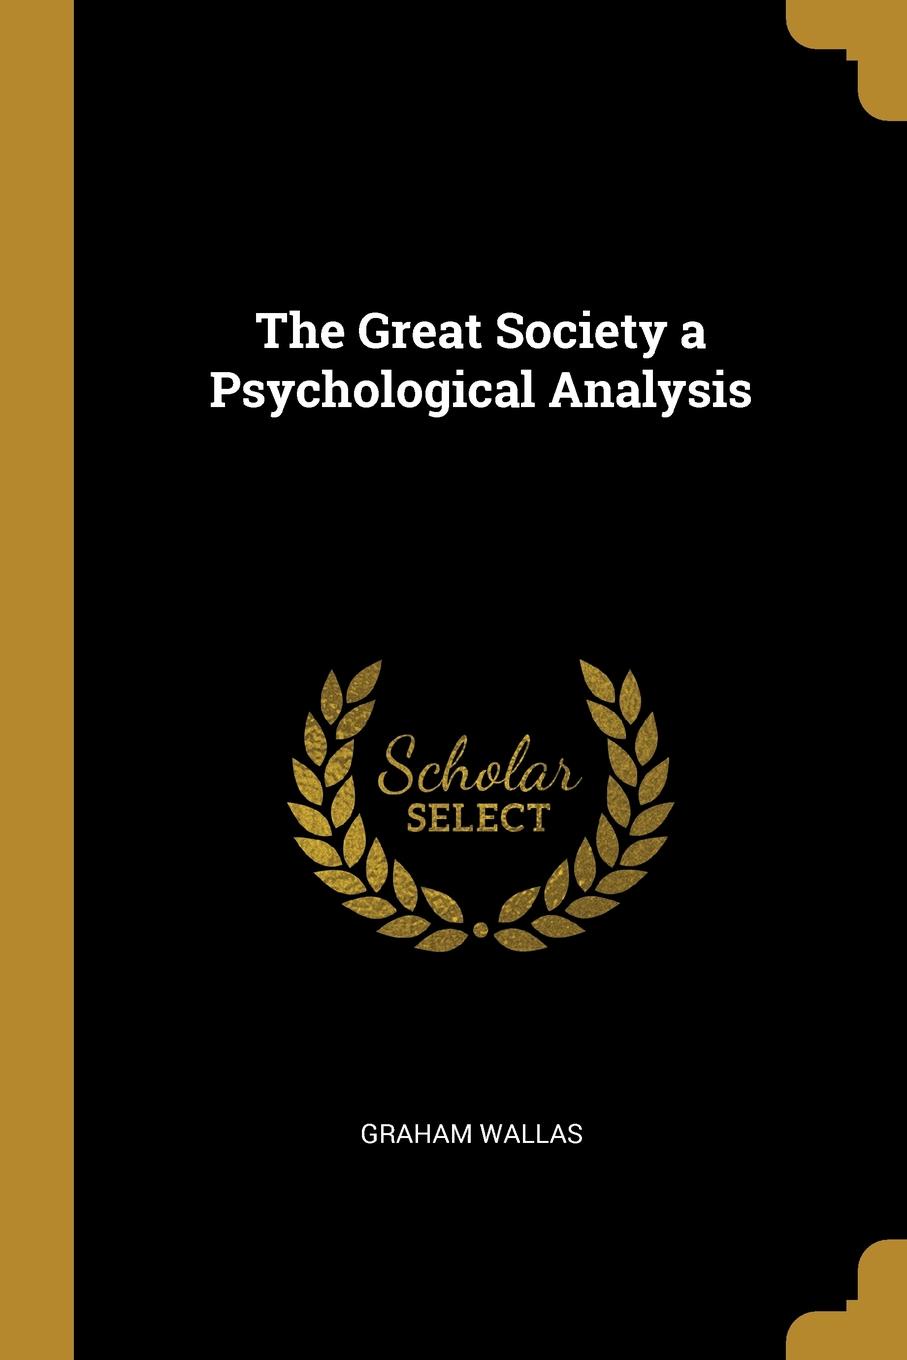 The Great Society a Psychological Analysis